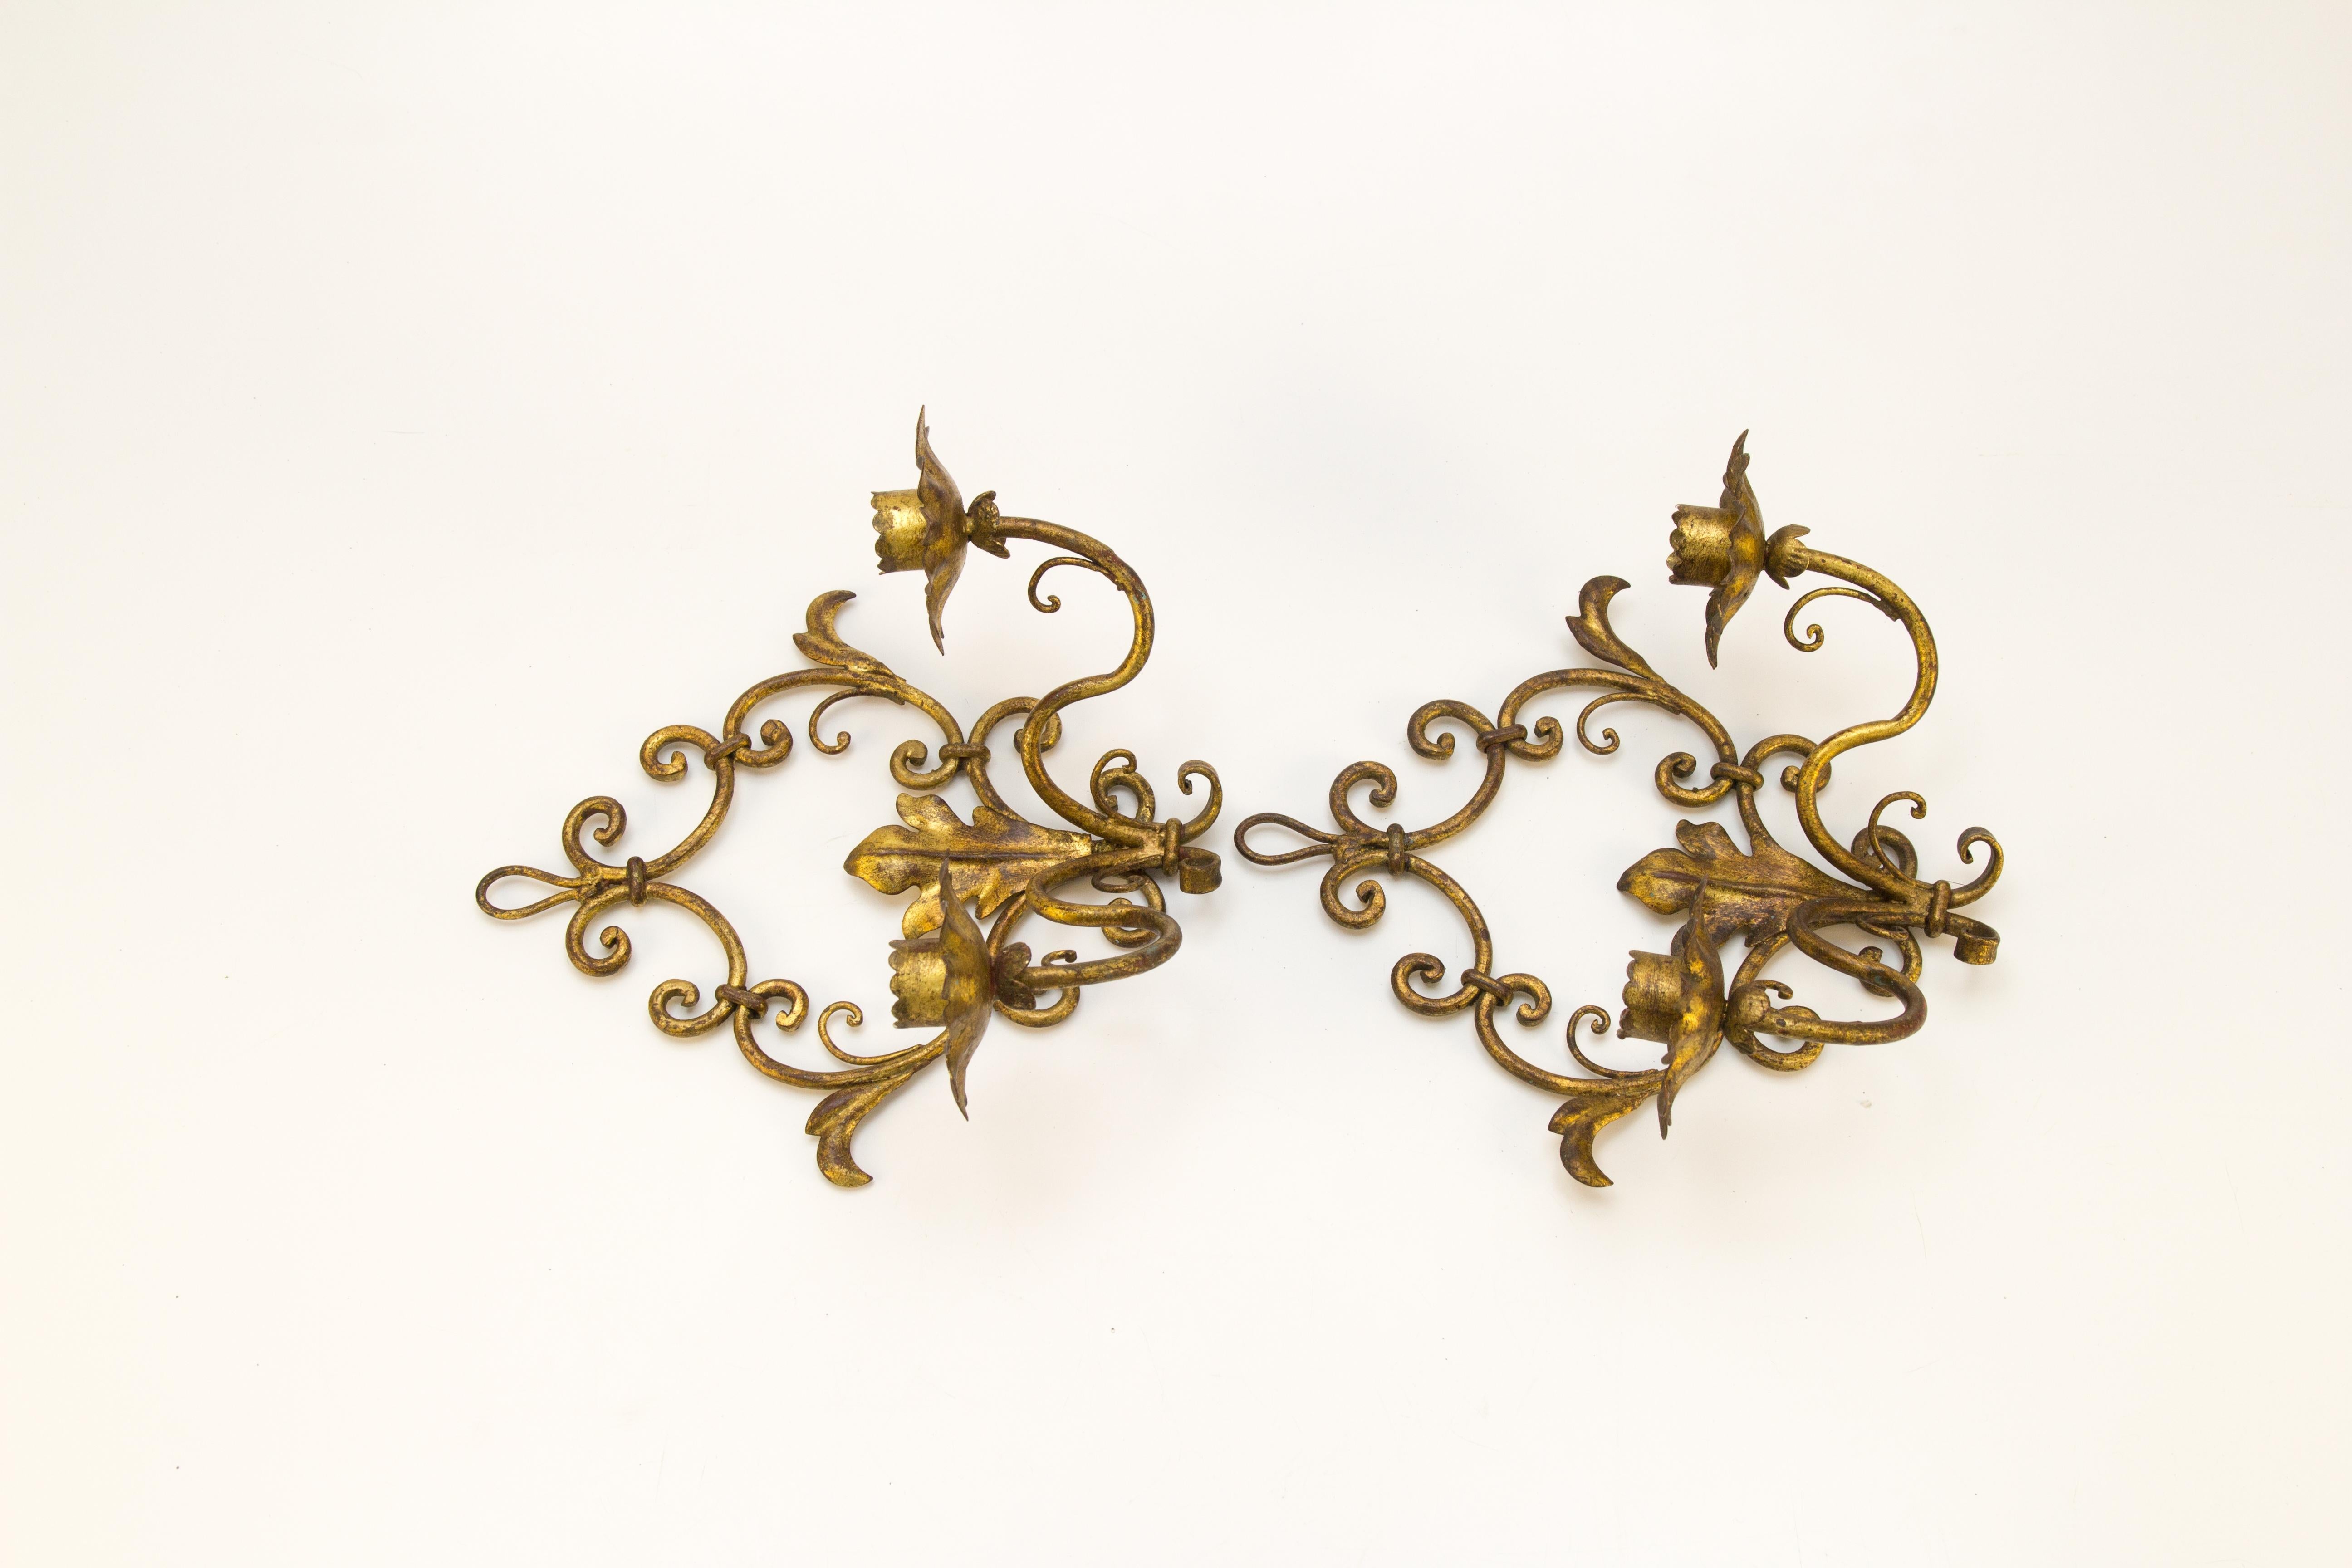 Pair of Italian Hollywood Regency Style Gilt Metal Candle Wall Sconces For Sale 4